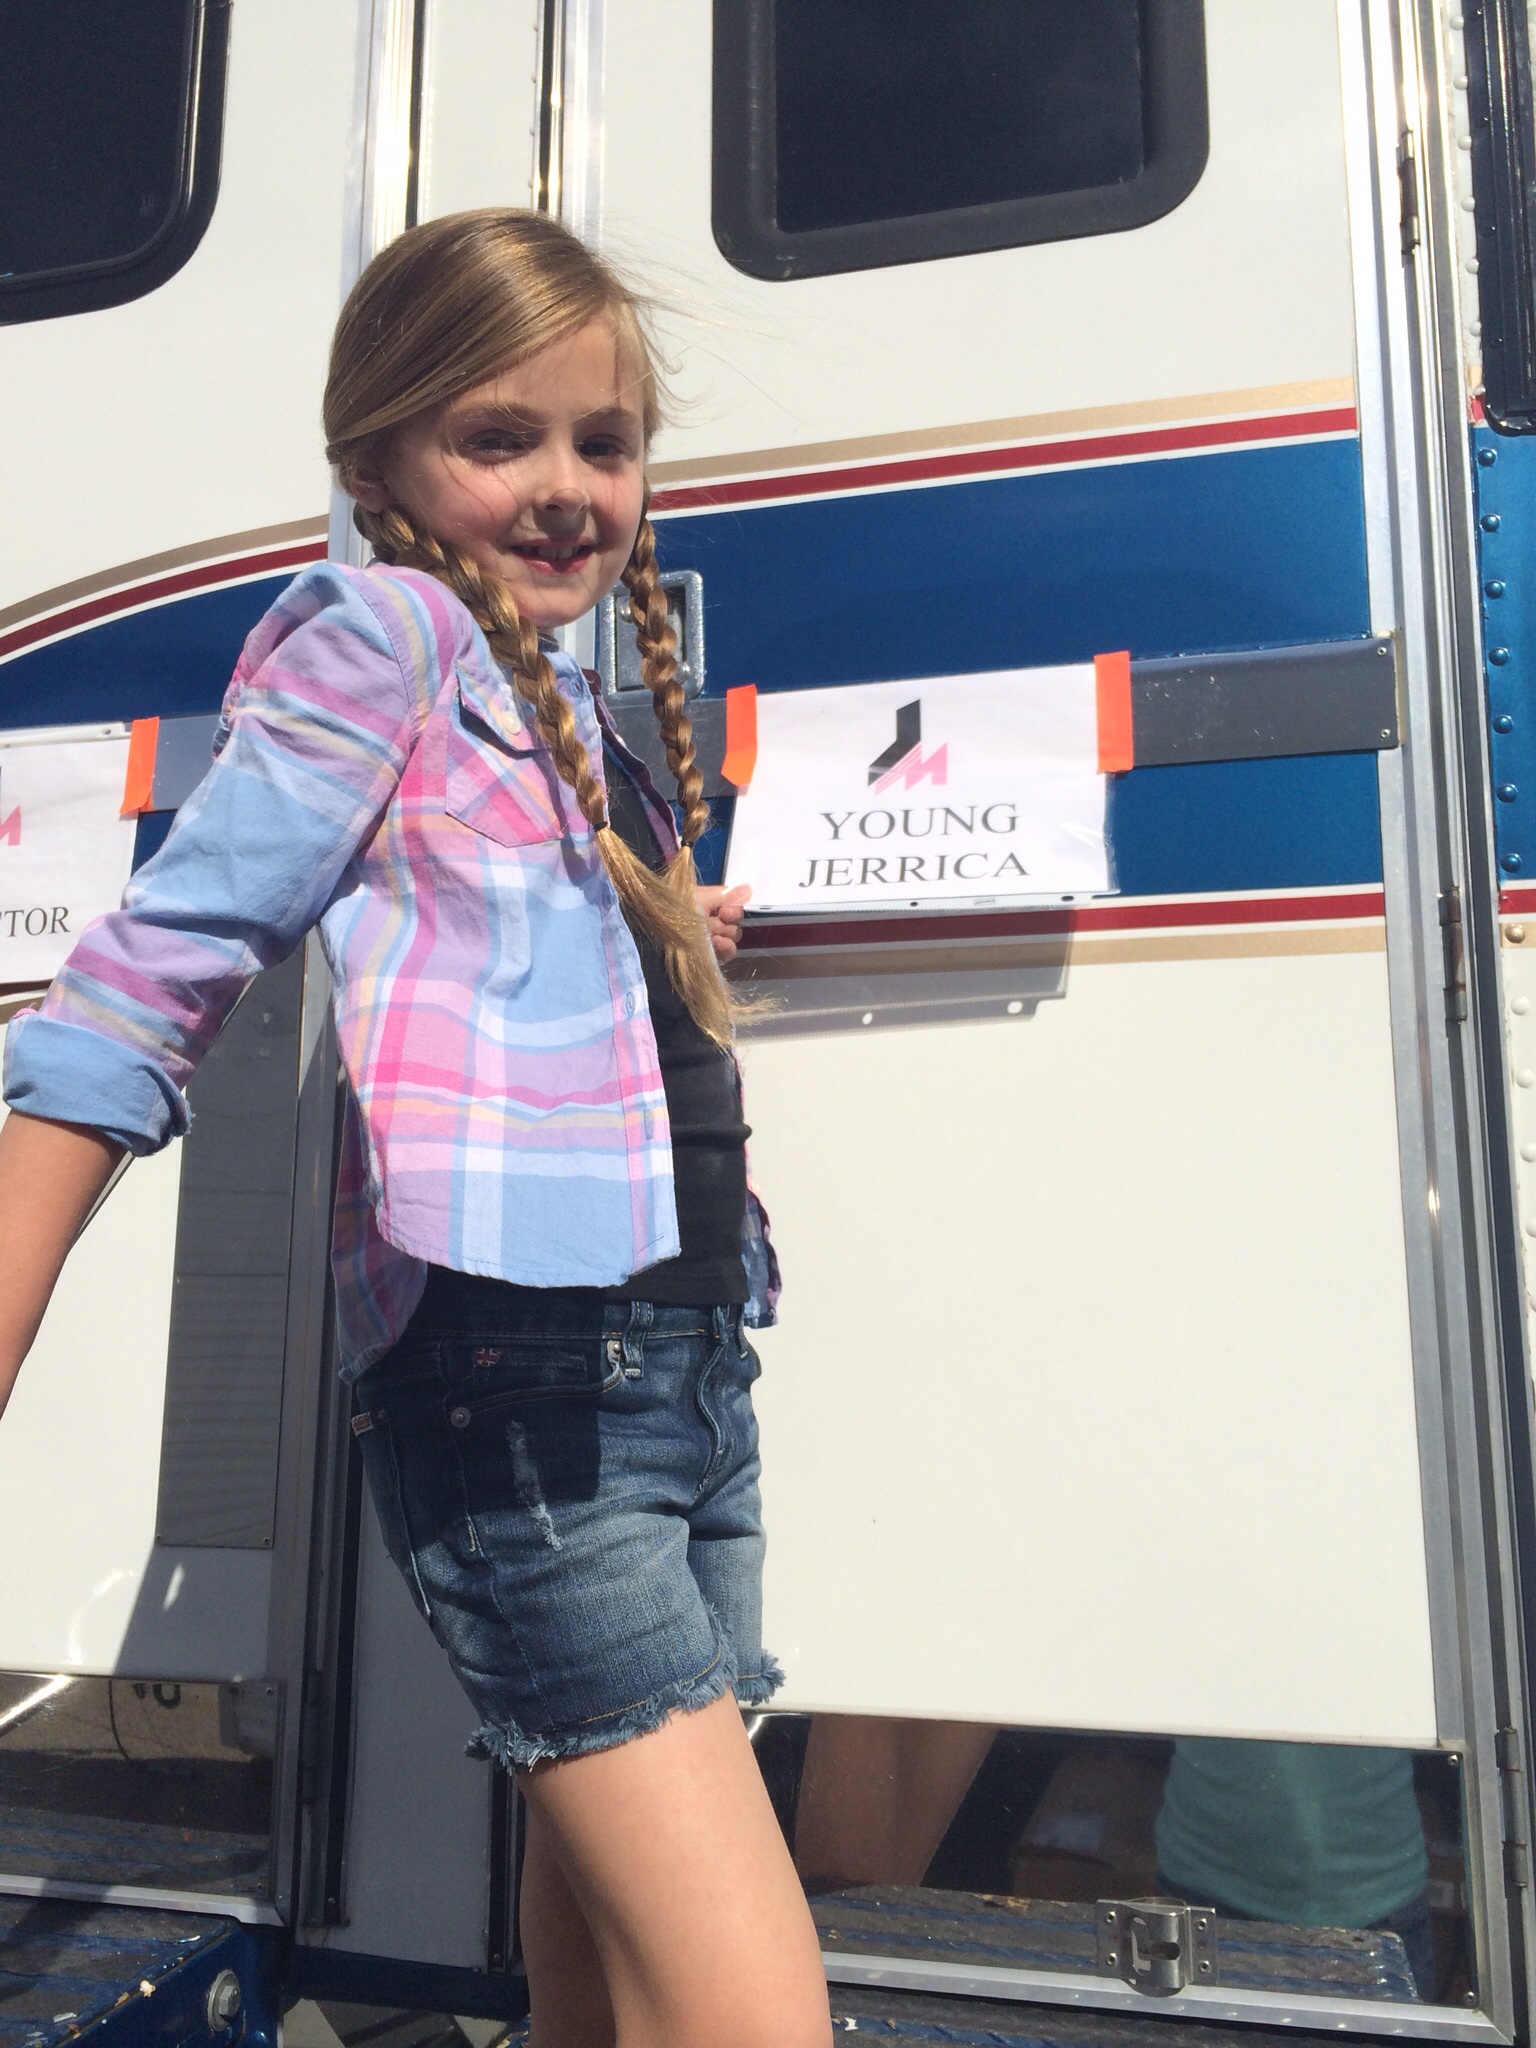 Isabella on set of Jem and the Holograms